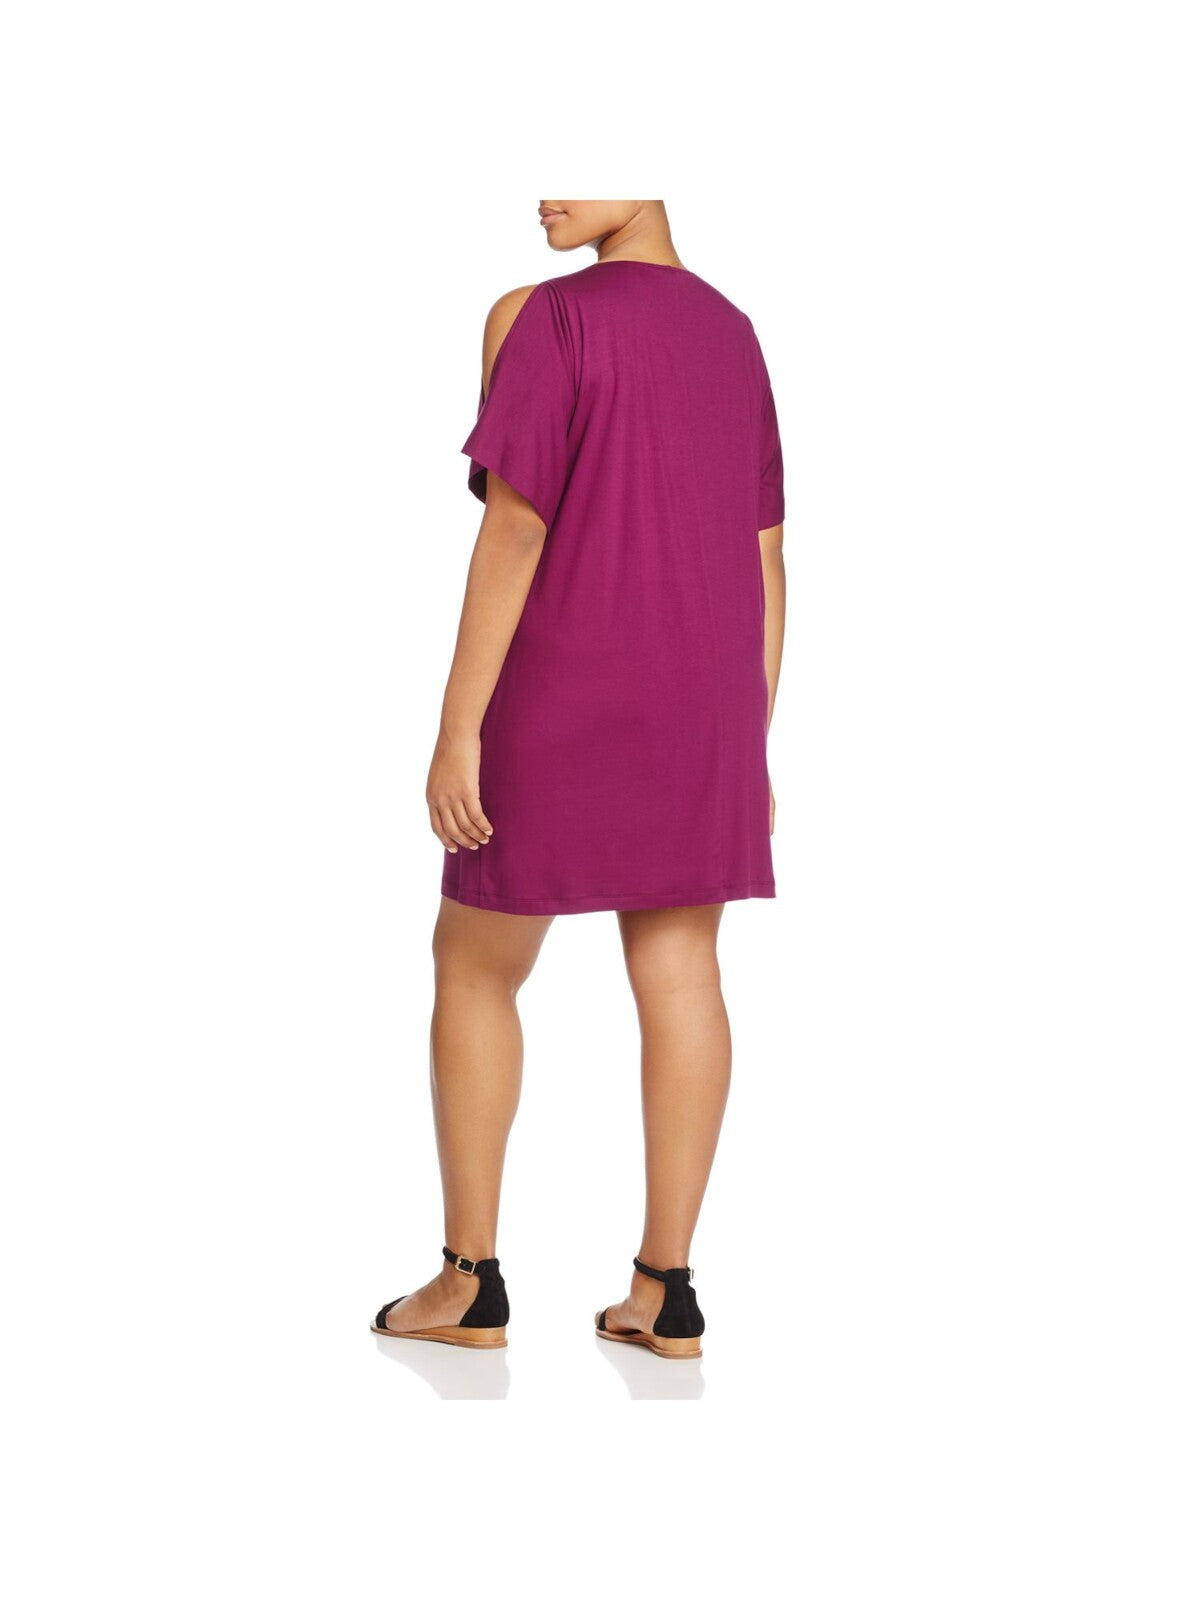 EILEEN FISHER Womens Purple Stretch Cold Shoulder Cocoon Jersey Elbow Sleeve Boat Neck Knee Length Shift Dress Plus 2X